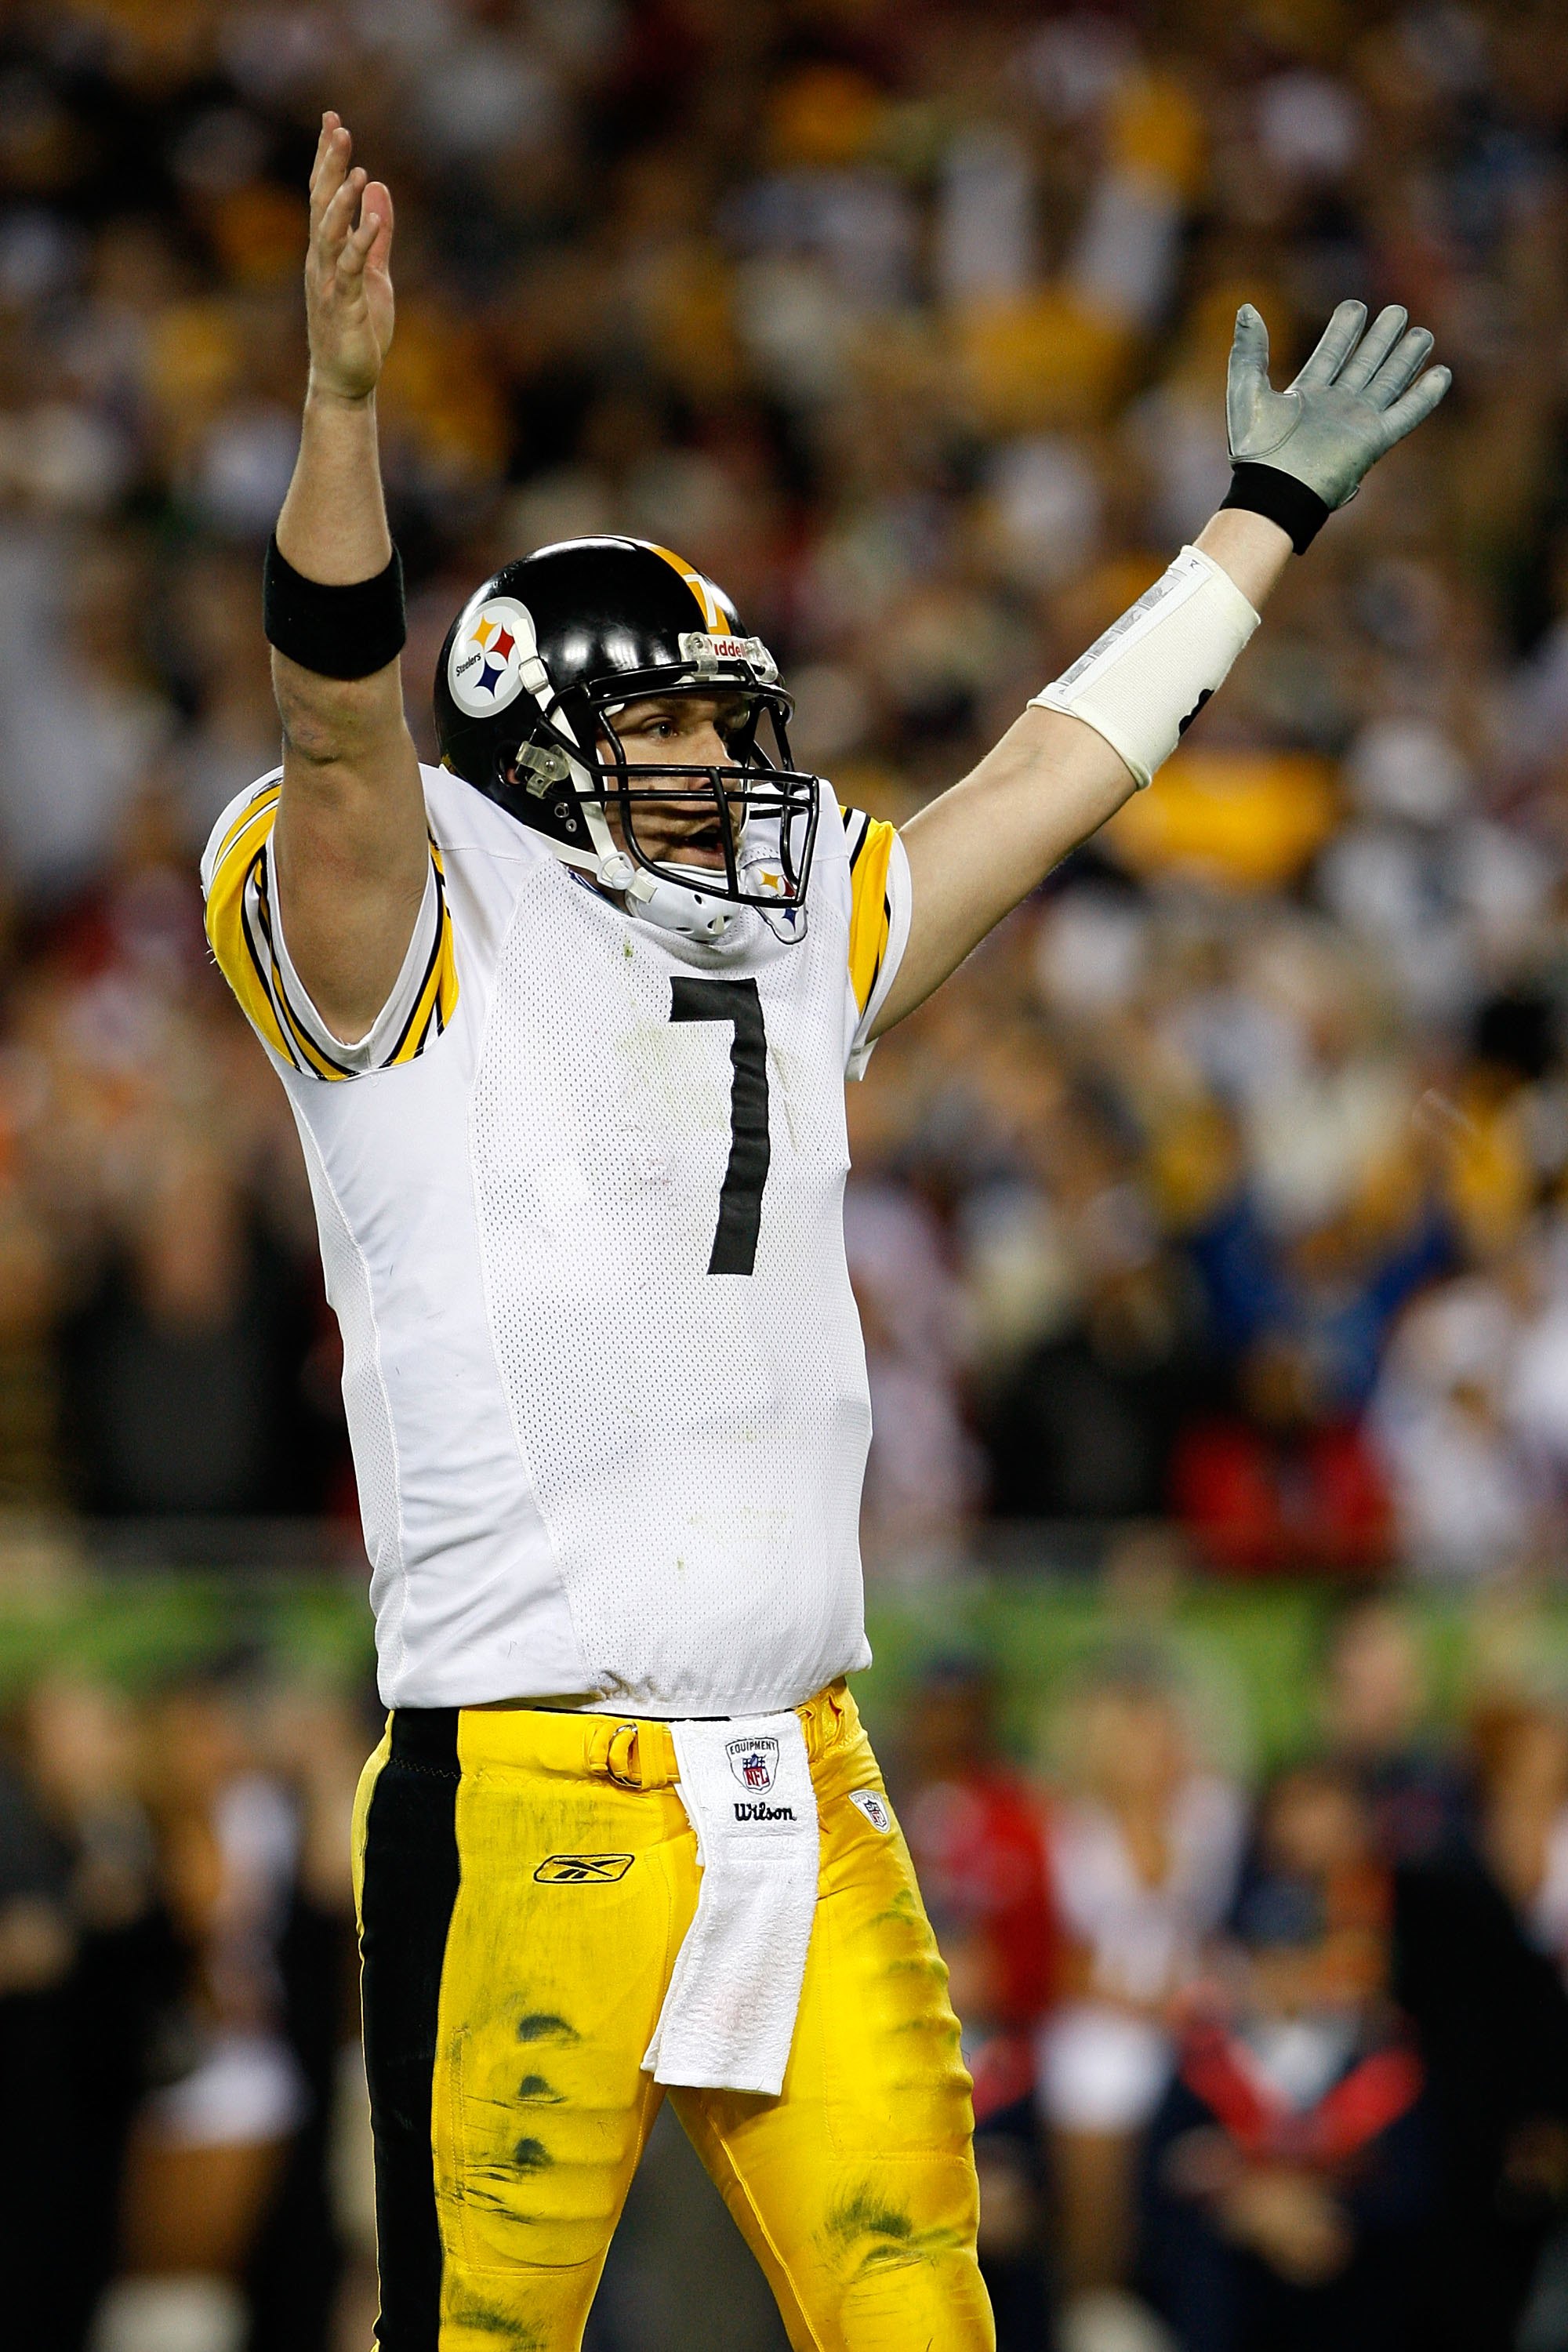 TAMPA, FL - FEBRUARY 01:  Quarterback Ben Roethlisberger #7 of the Pittsburgh Steelers celebrates against the Arizona Cardinals during Super Bowl XLIII on February 1, 2009 at Raymond James Stadium in Tampa, Florida.  (Photo by Jamie Squire/Getty Images)